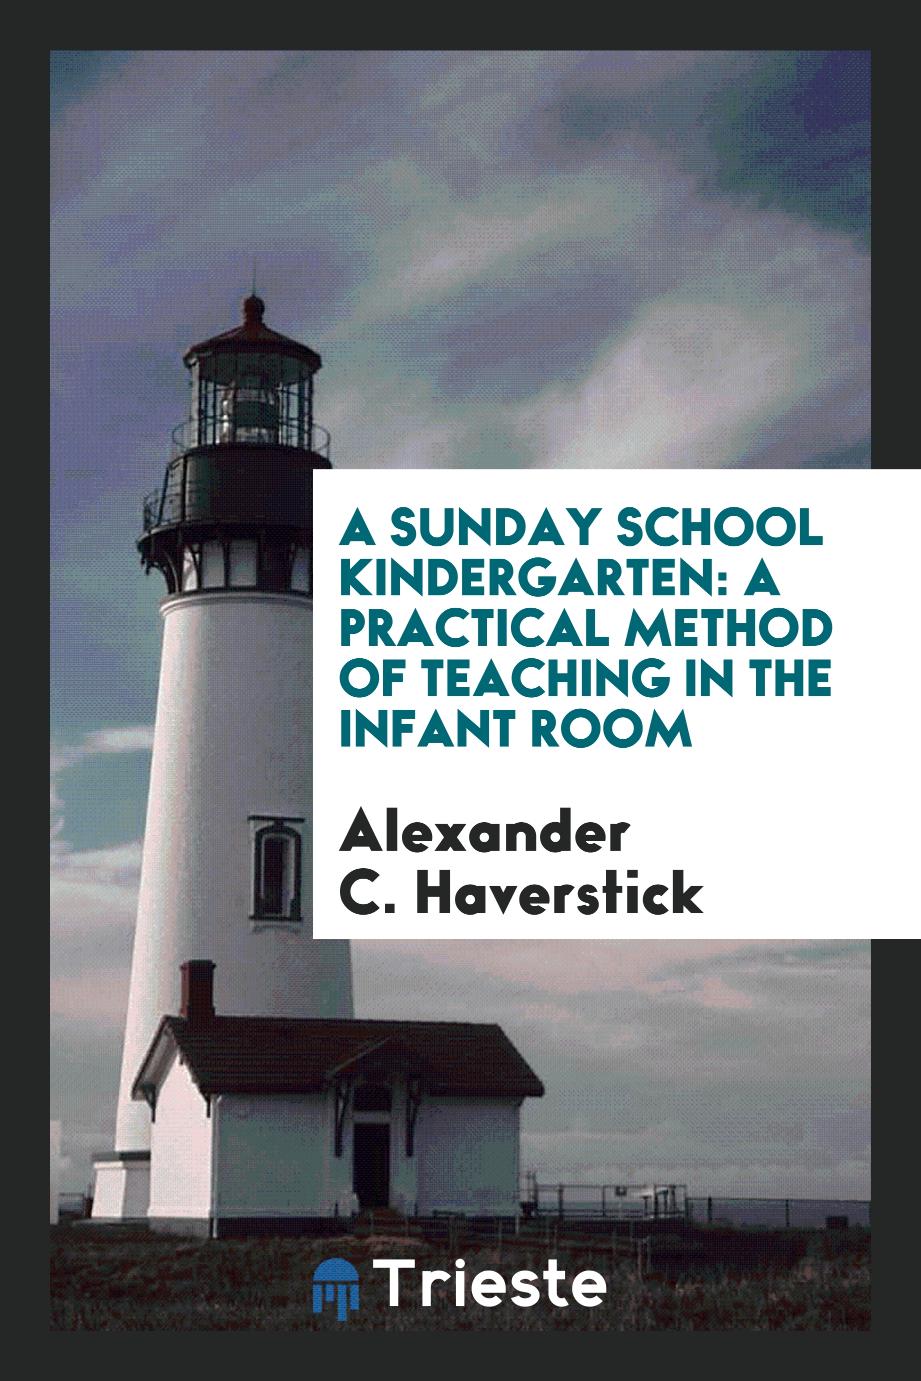 A Sunday School Kindergarten: A Practical Method of Teaching in the Infant Room